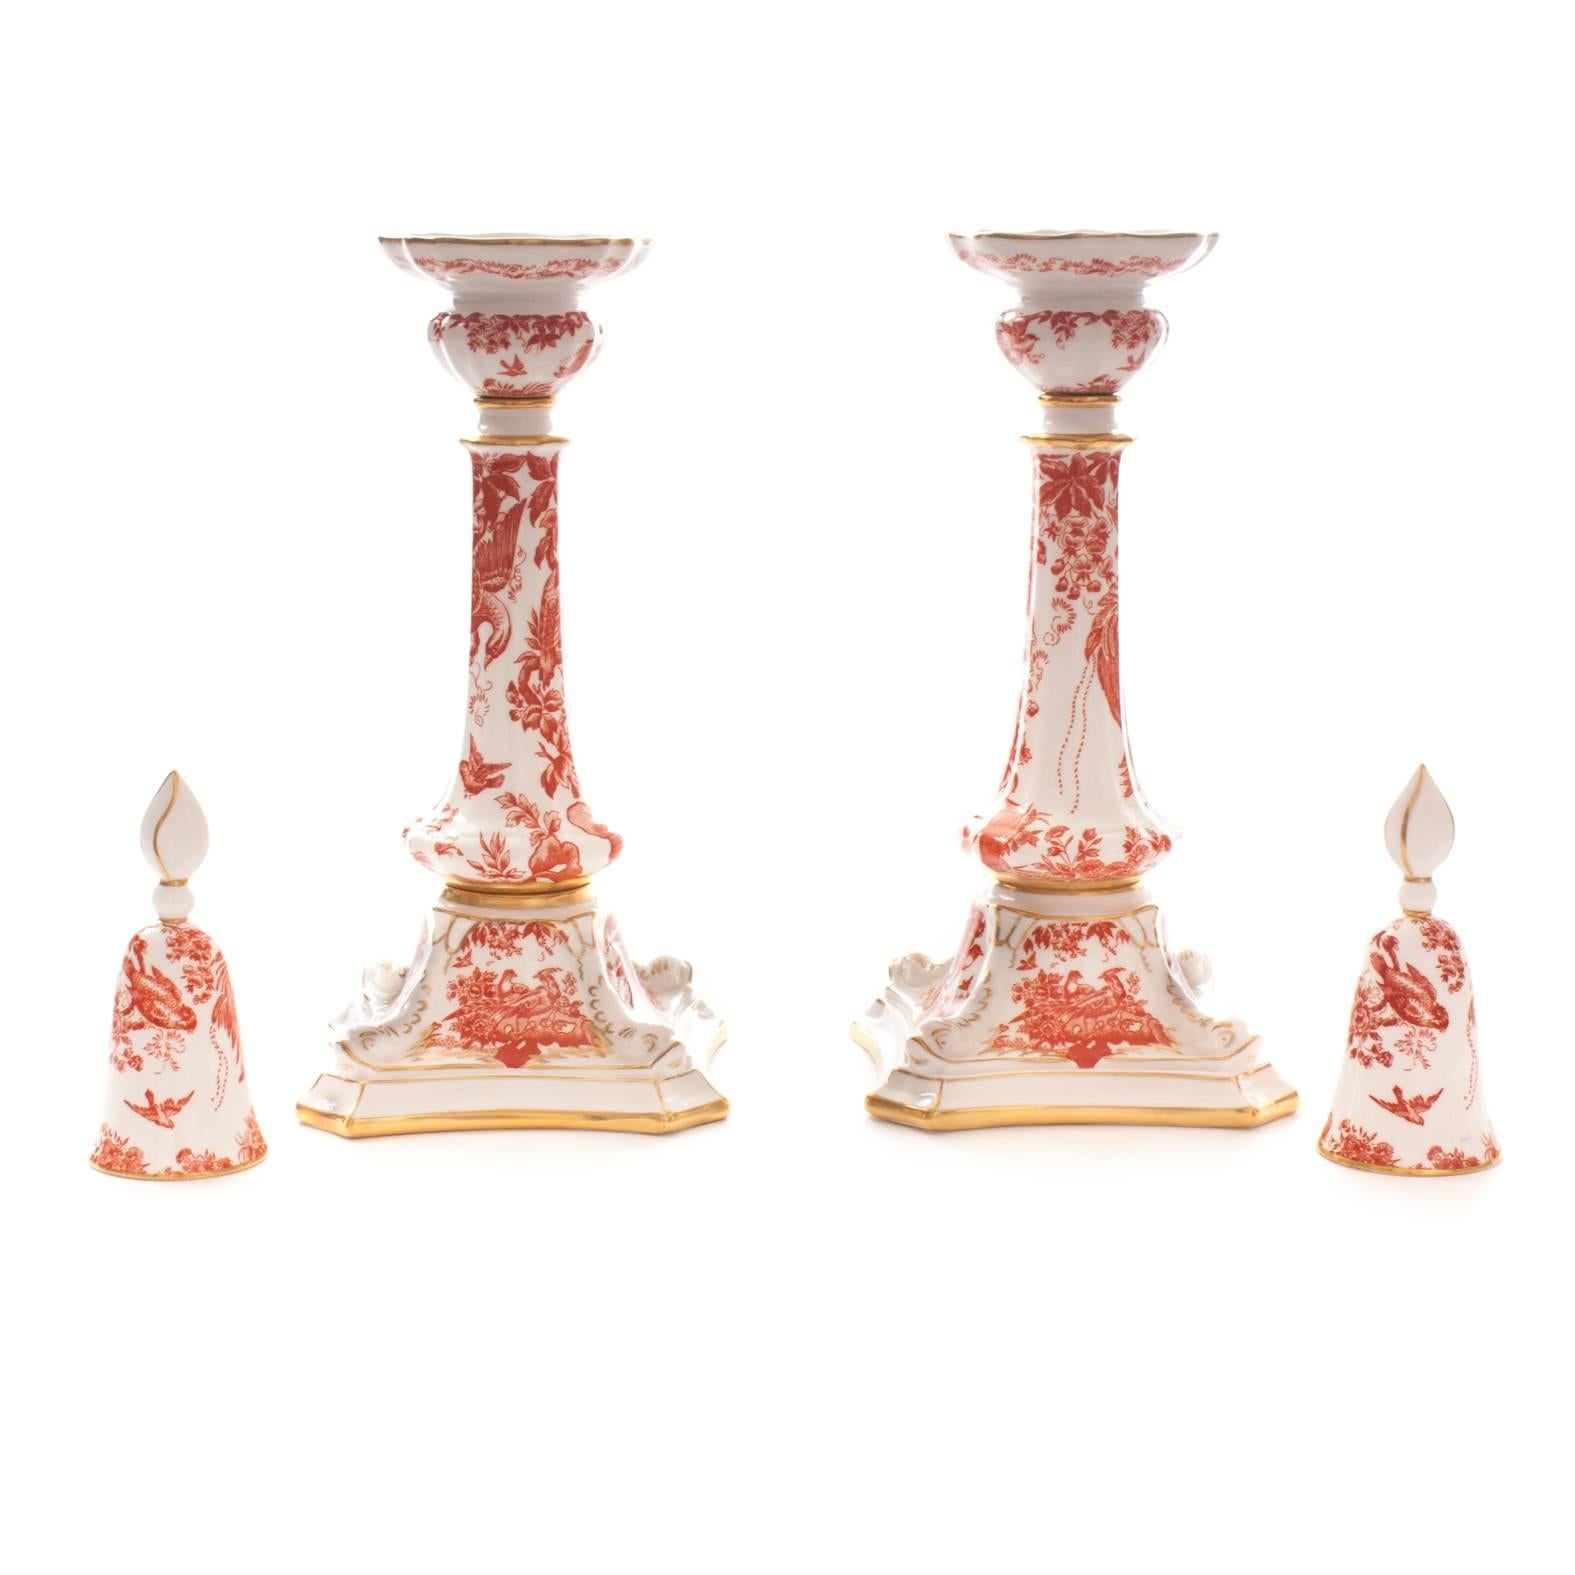 One of Derby's most beloved pattern in their classically shaped form. A pair of candlesticks with a 4 figural dolphin base and hand trimmed 24k gold accents.  Complete with their candle snuffers and gives the set a completely different look with or